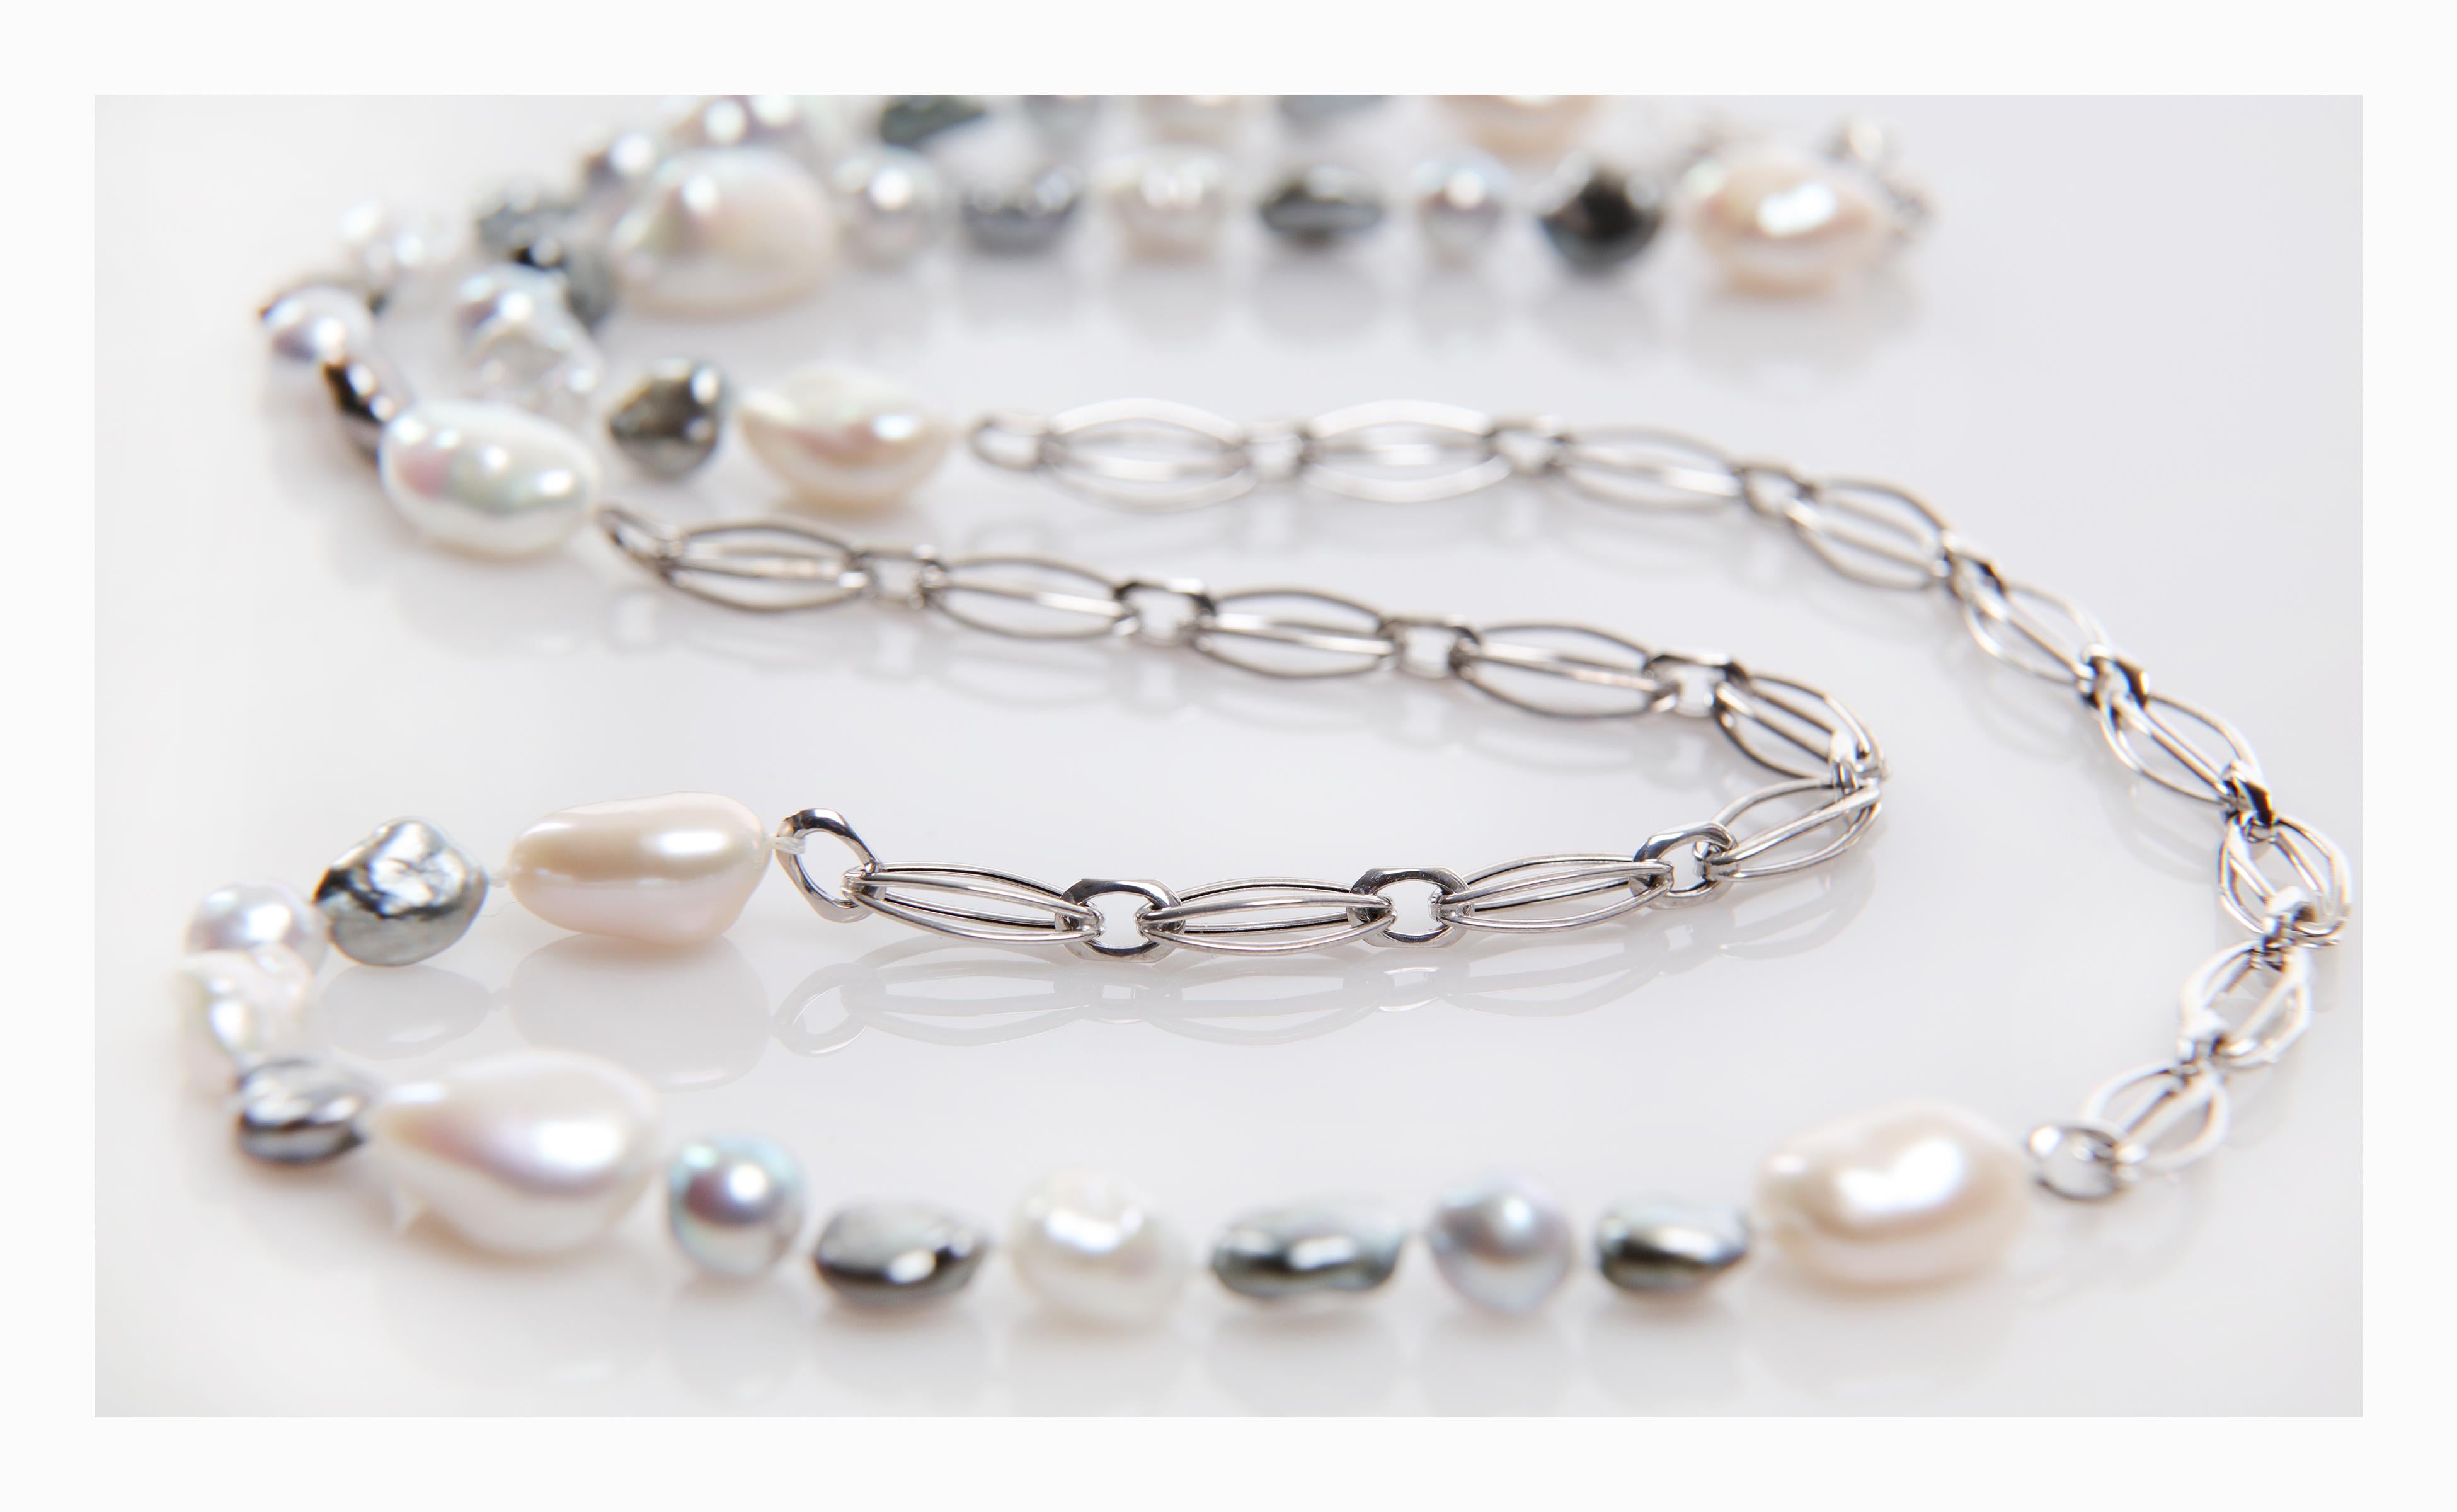 Black tie events are fun.  You are halfway to being ready when your permanent collection includes a Tahitian and akoya pearl necklace, especially one combined with a luxurious, white gold chain.  Imagine how easy it is to plan a wardrobe when one of